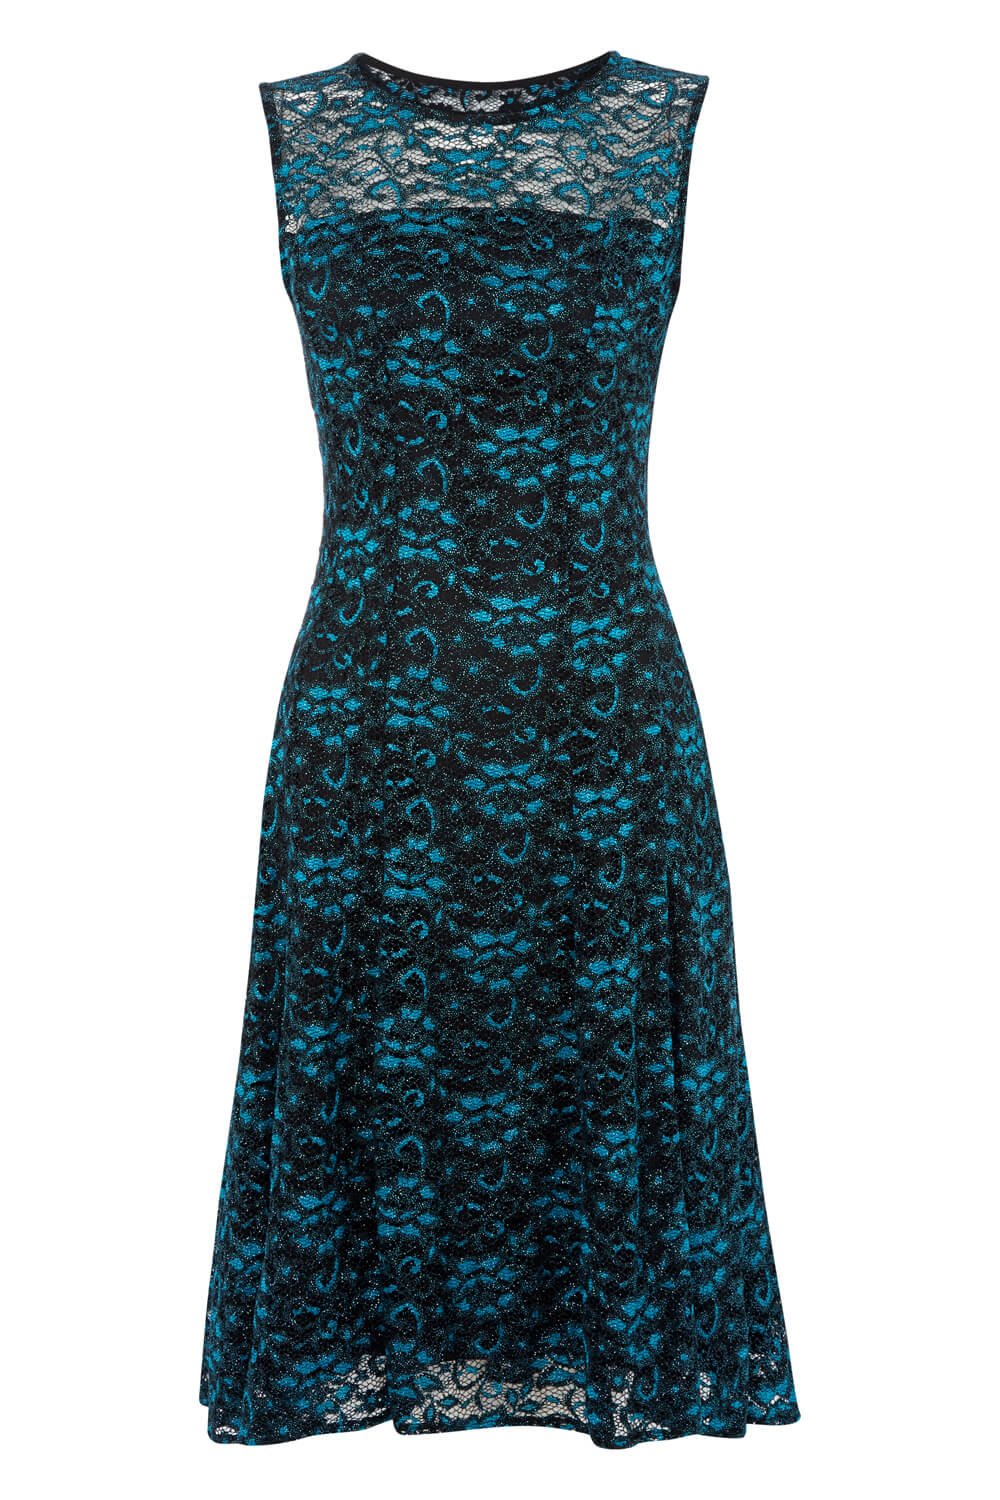 Teal Shimmer Lace Fit and Flare Dress, Image 5 of 5